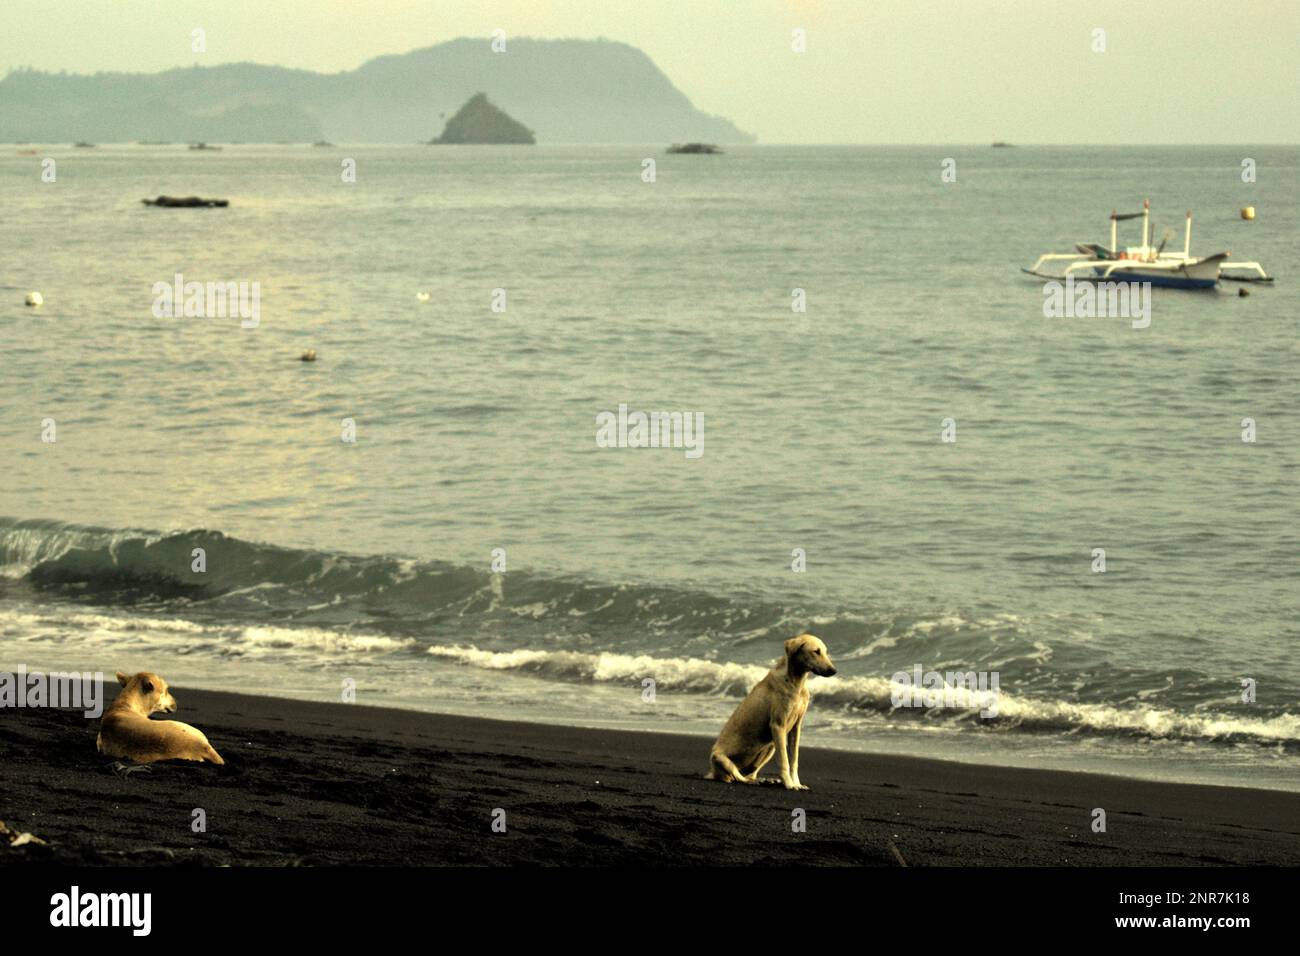 Dogs on volcanic sandy beach in a background of coastal water and a fishing boat in Batuputih (Batu Putih) fishing village located near the protected terrestrial forest of Tangkoko Nature Reserve in North Bitung, Bitung, North Sulawesi, Indonesia. Indonesia plans to expand protection of its seas to cover an area of approximately 325,000 square kilometers or 10% of its territorial waters by the end of this decade, according to Mongabay in their August 2022 publication. Then 'from 2030 to 2045, the government plans to triple the marine protected area coverage to 975,000 square kilometers,'... Stock Photo